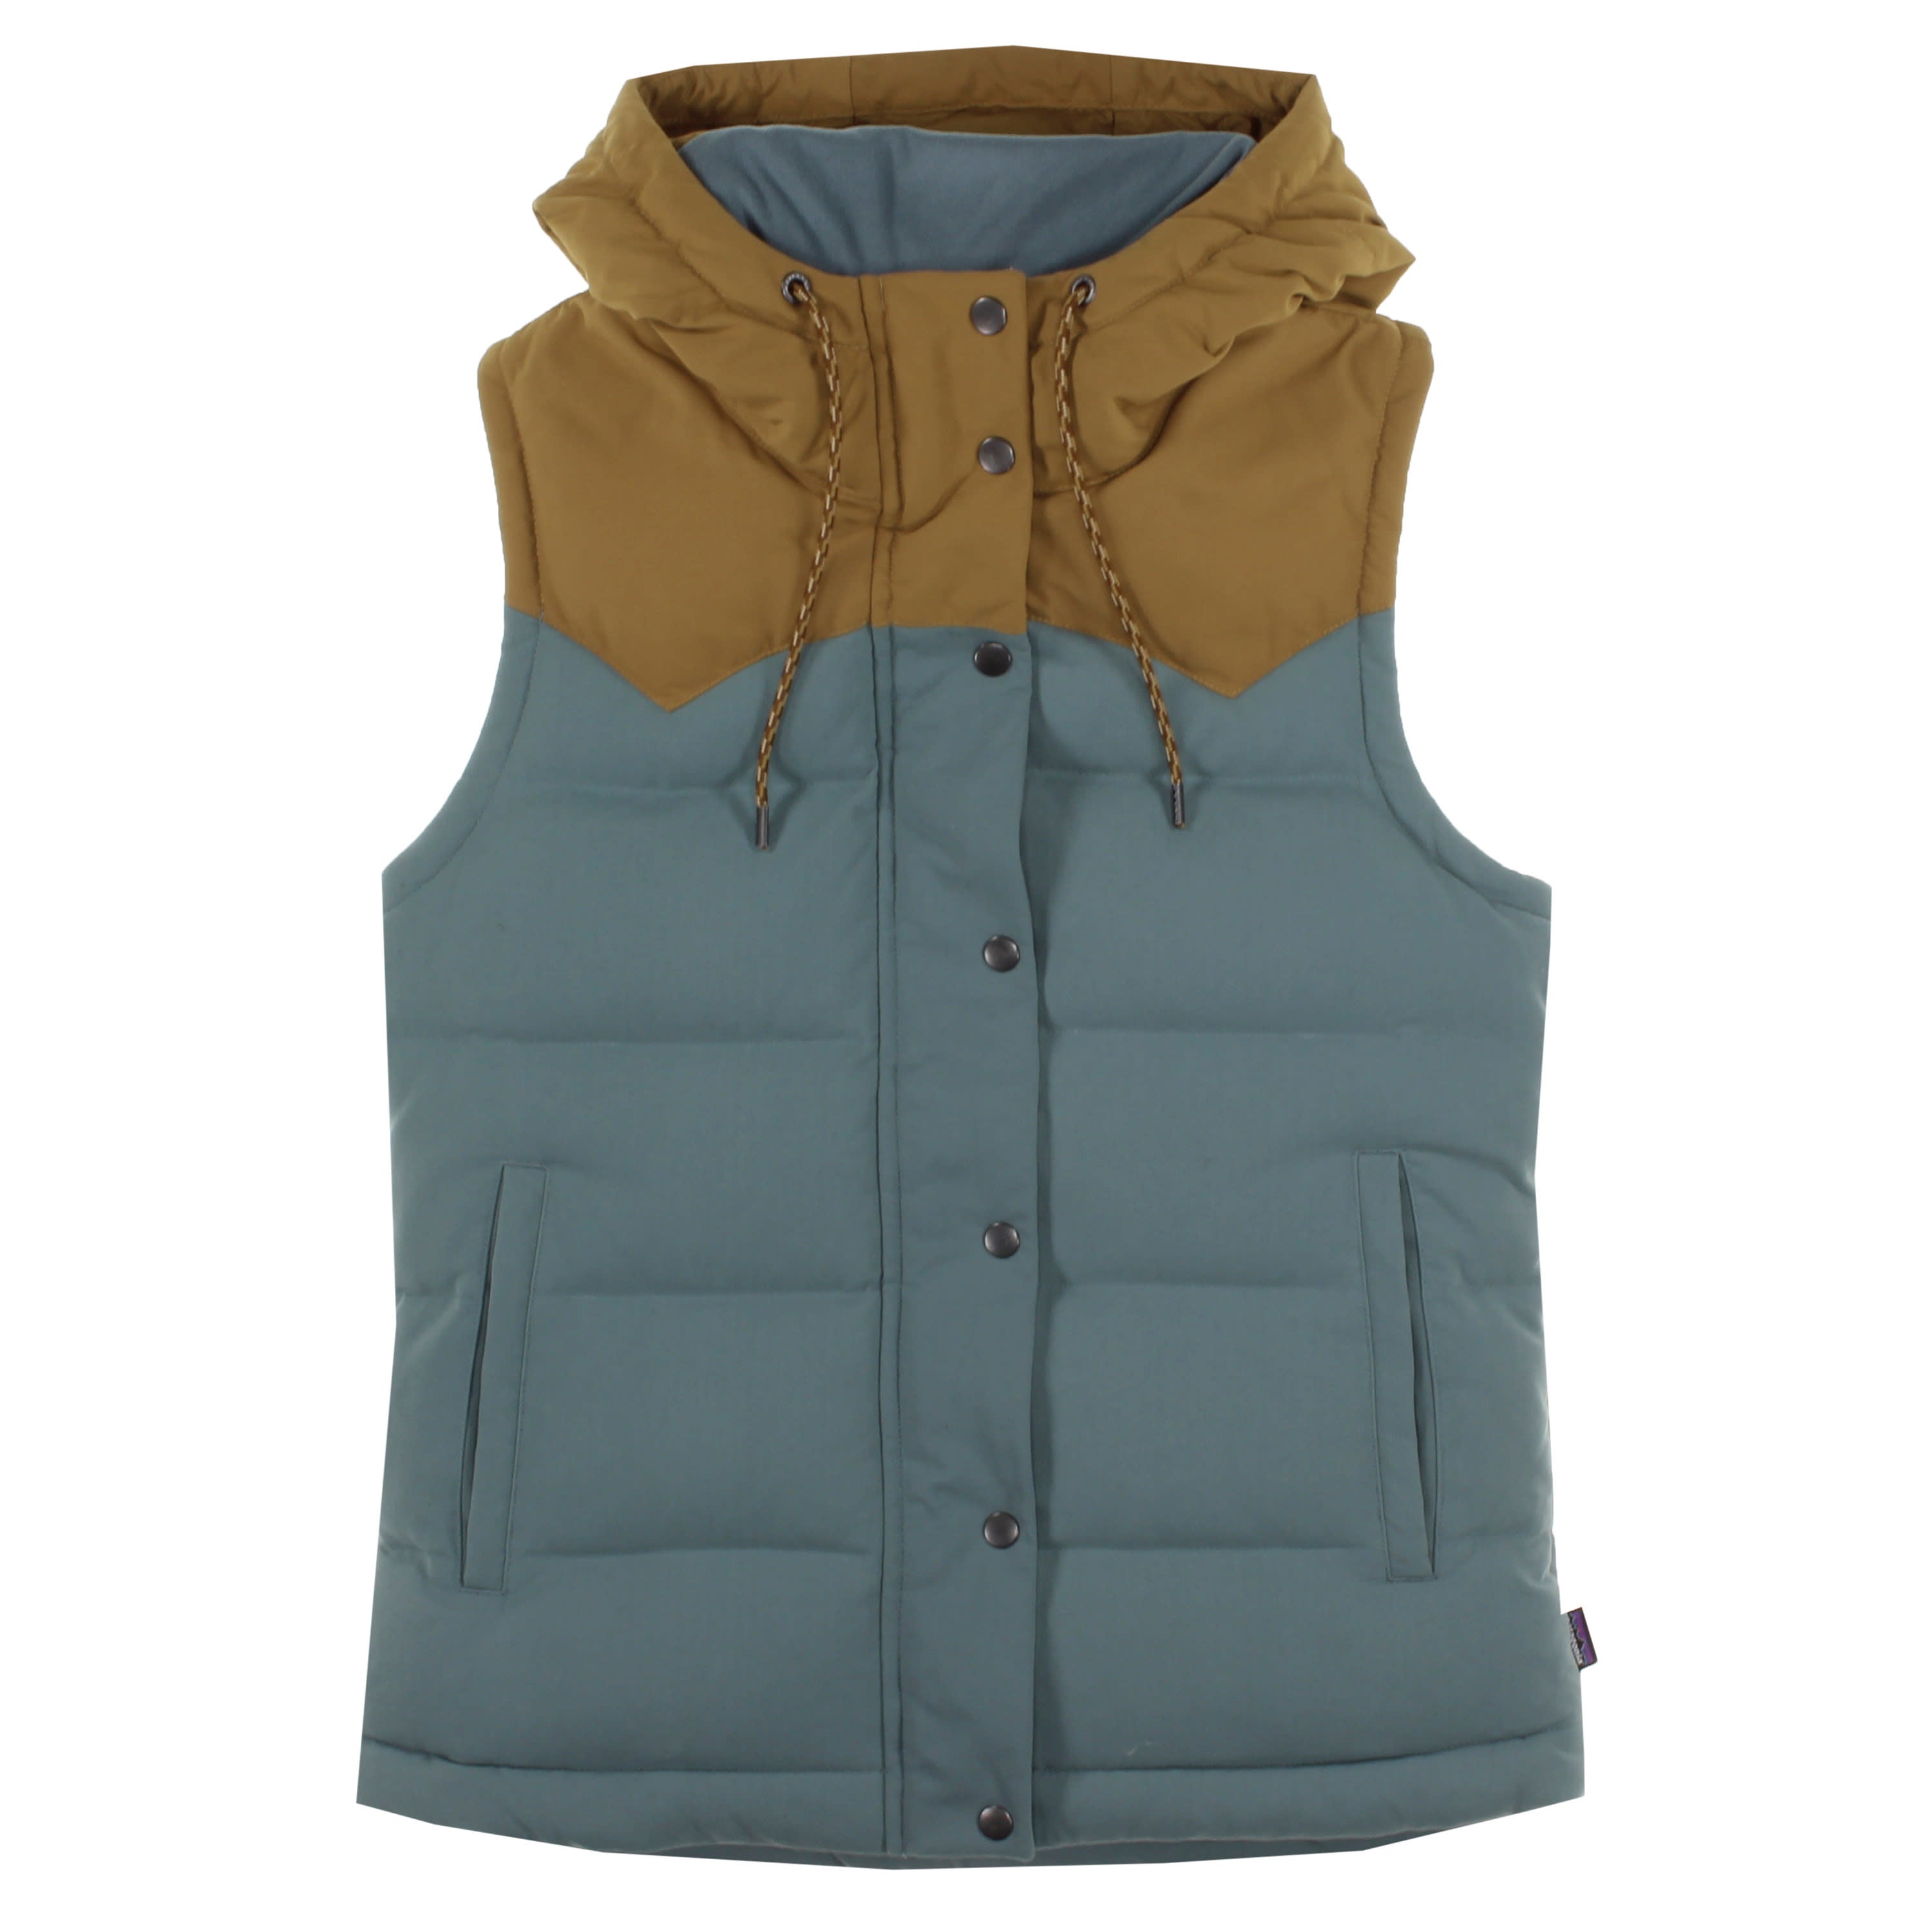 Women's PATAGONIA Goose Down Bivy Hooded Sweater Vest Jacket XS